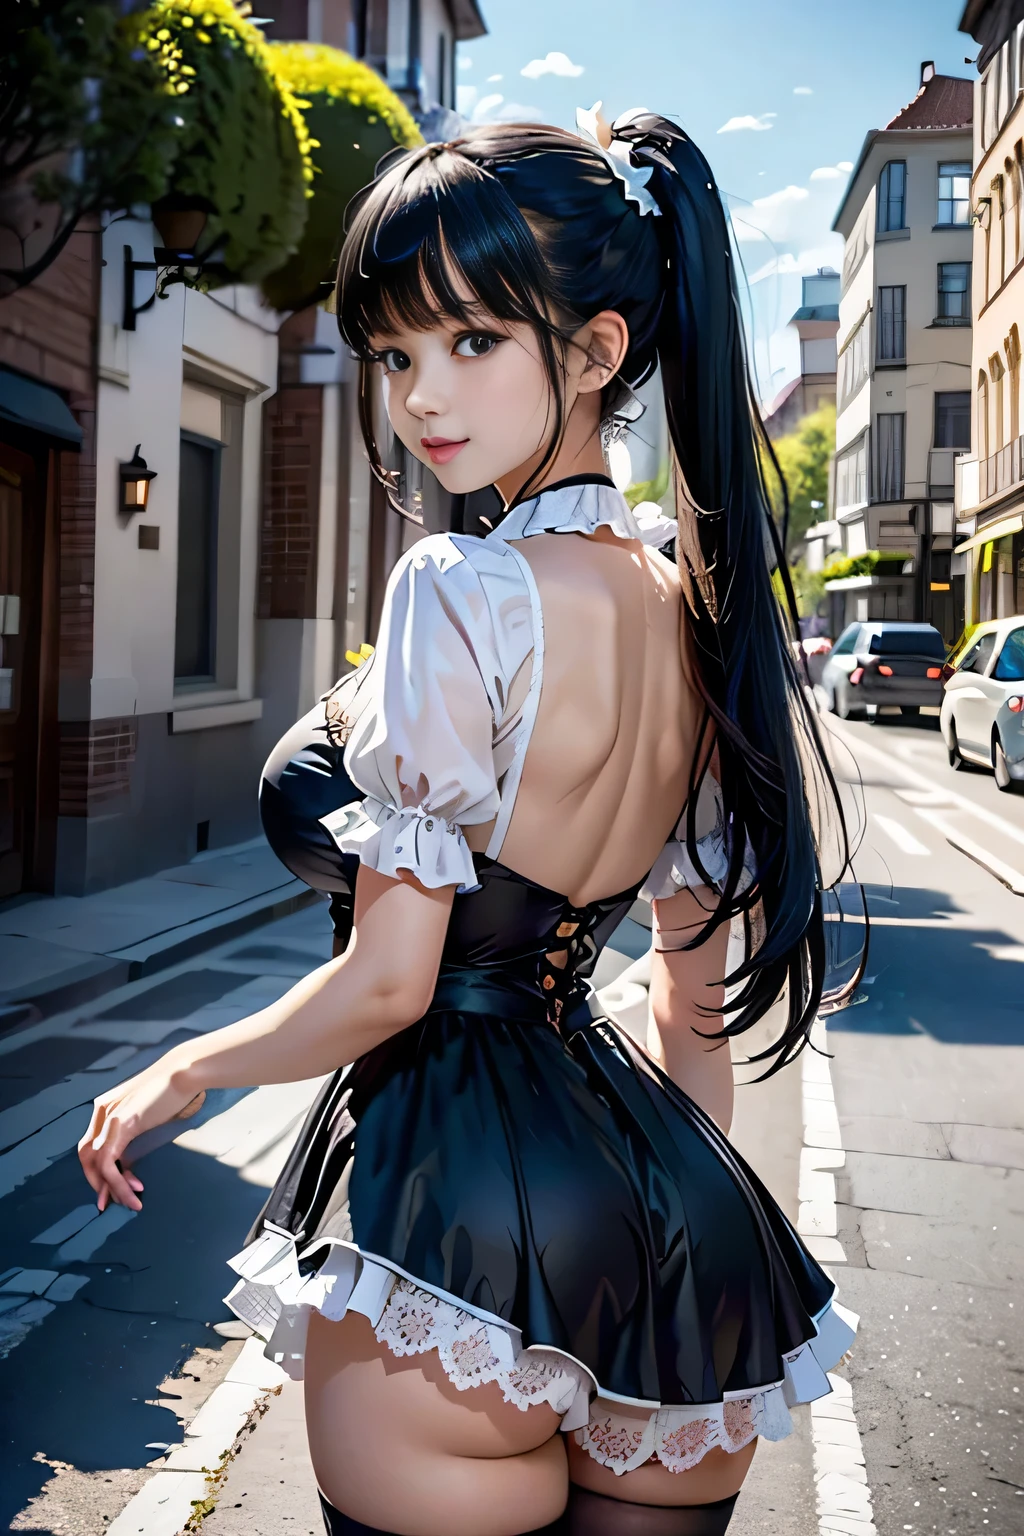 (beautiful elegant white panties), (looking back at the viewer),♥(sexy mini dress lolita gothic costume),((1girl,cute,young,semi long beautiful black hair,blunt bangs,pony tale,beautiful blue eyes)),(solo),((masterpiece, highest resolution,best quality)), (beautiful illustration),(lolita gothic costume),(looking back at the viewer), innocent smile,cinematic lighting,beautiful modern cafe,big city,flowers,buildings,blue sky